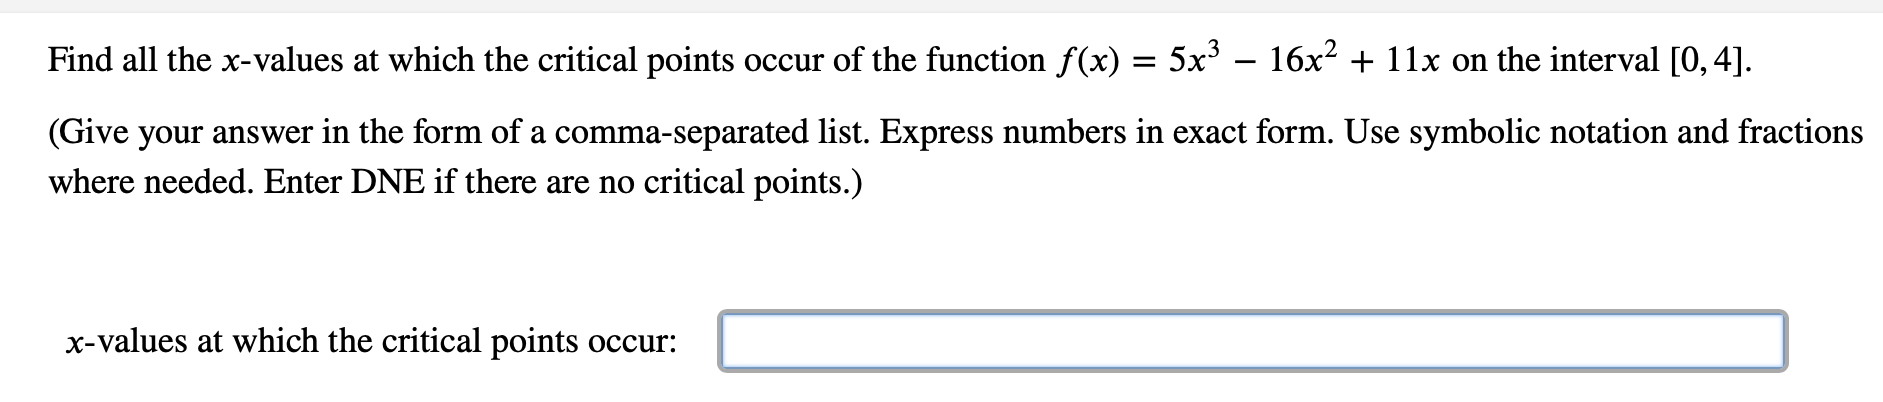 Find all the x-values at which the critical points occur of the function f(x) = 5x³ – 16x2 + 11x on the interval [0, 4].
(Give your answer in the form of a comma-separated list. Express numbers in exact form. Use symbolic notation and fractions
where needed. Enter DNE if there are no critical points.)
